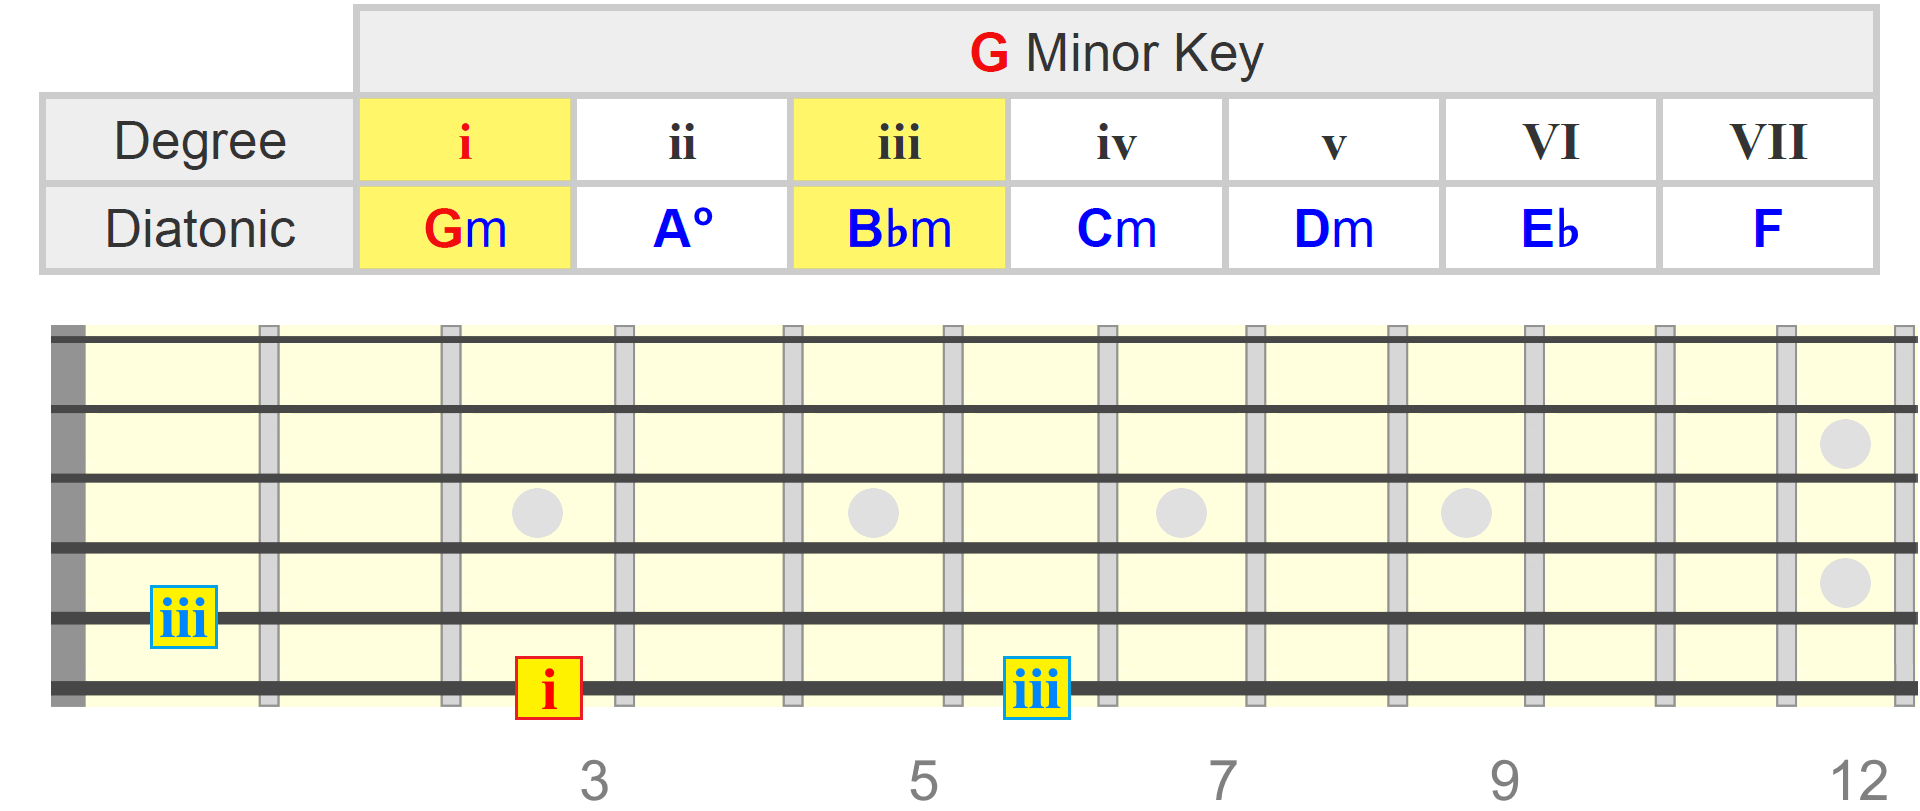 Soulful Progressions Using Extended Minor Chords Minor 9 Minor 11